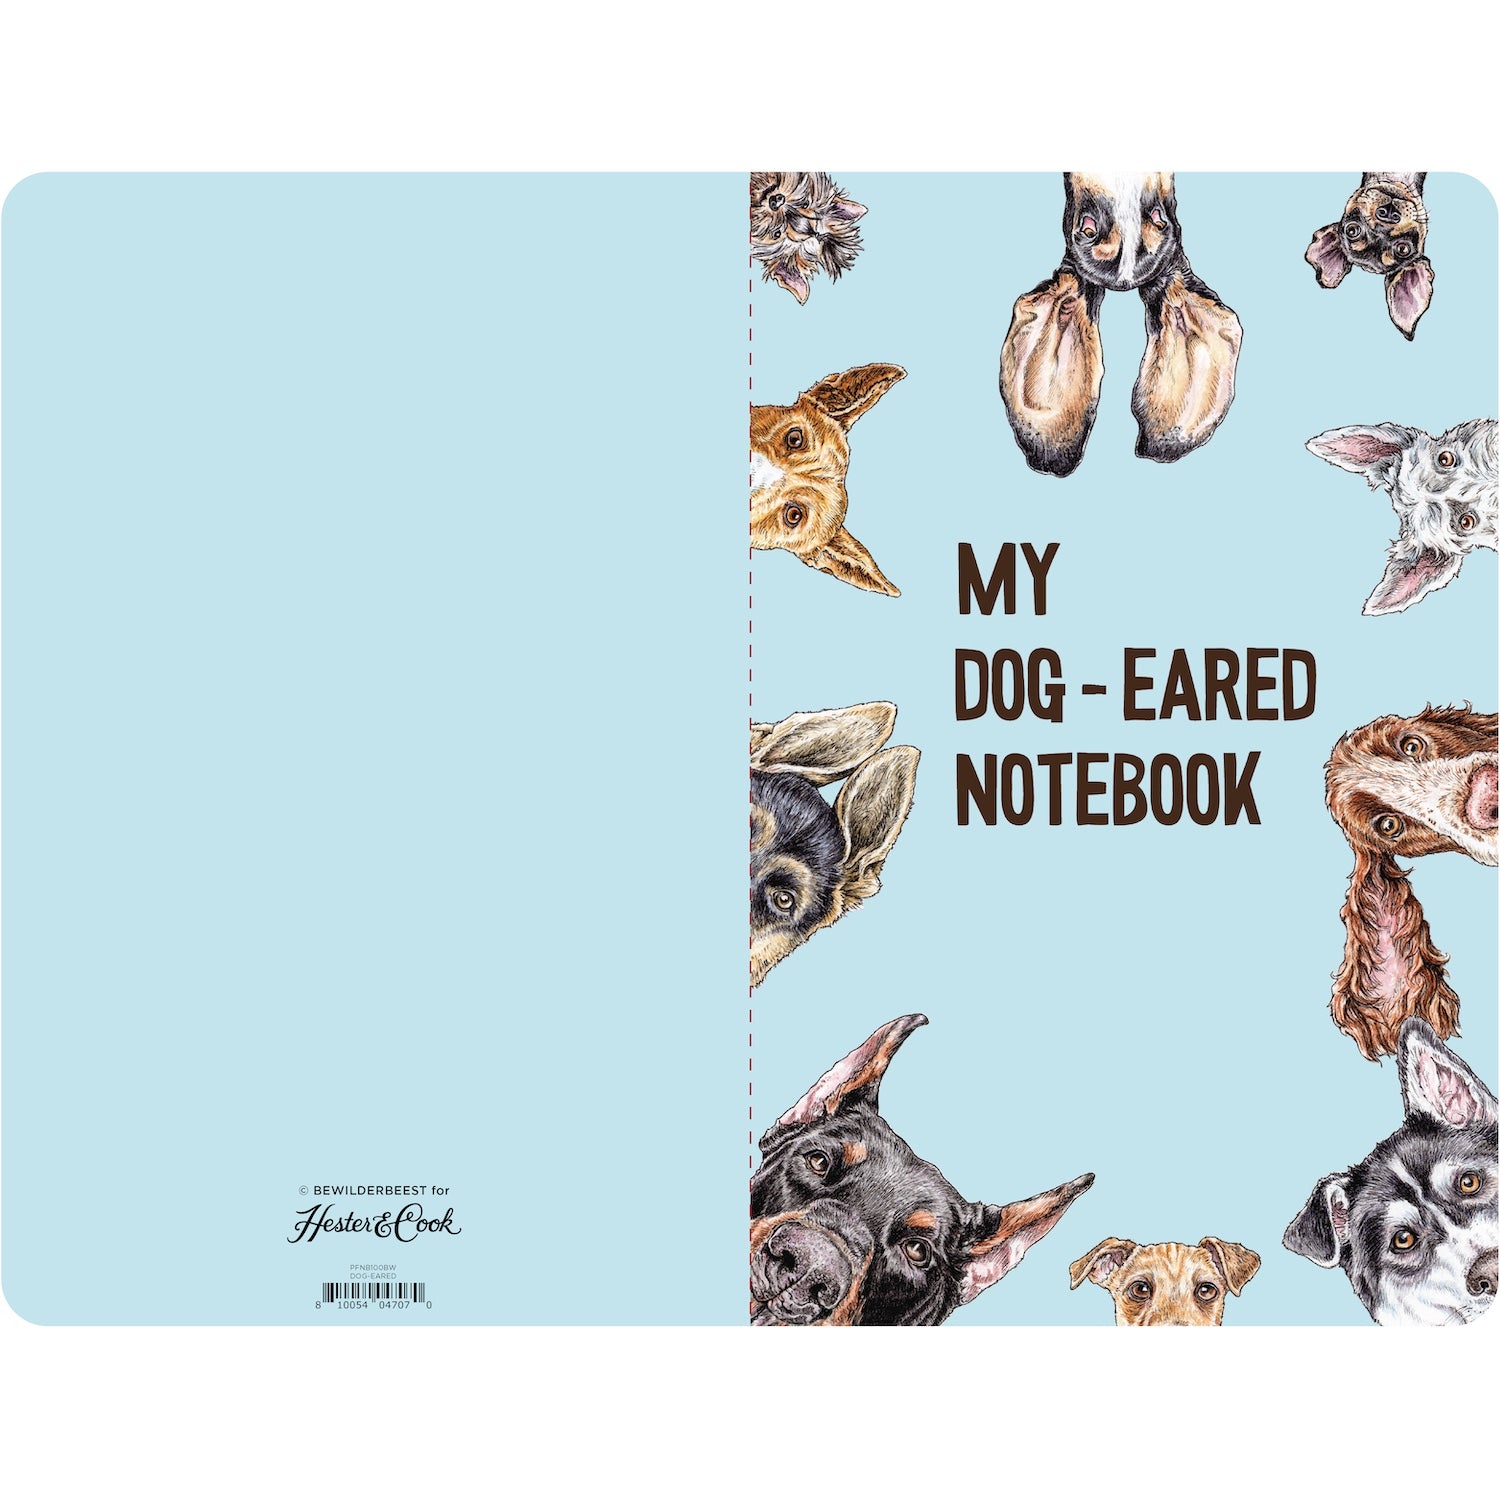 The open back and front covers of the Dog-Eared Notebook, featuring a dog ear illustration on the front, and a solid baby blue background across both covers.